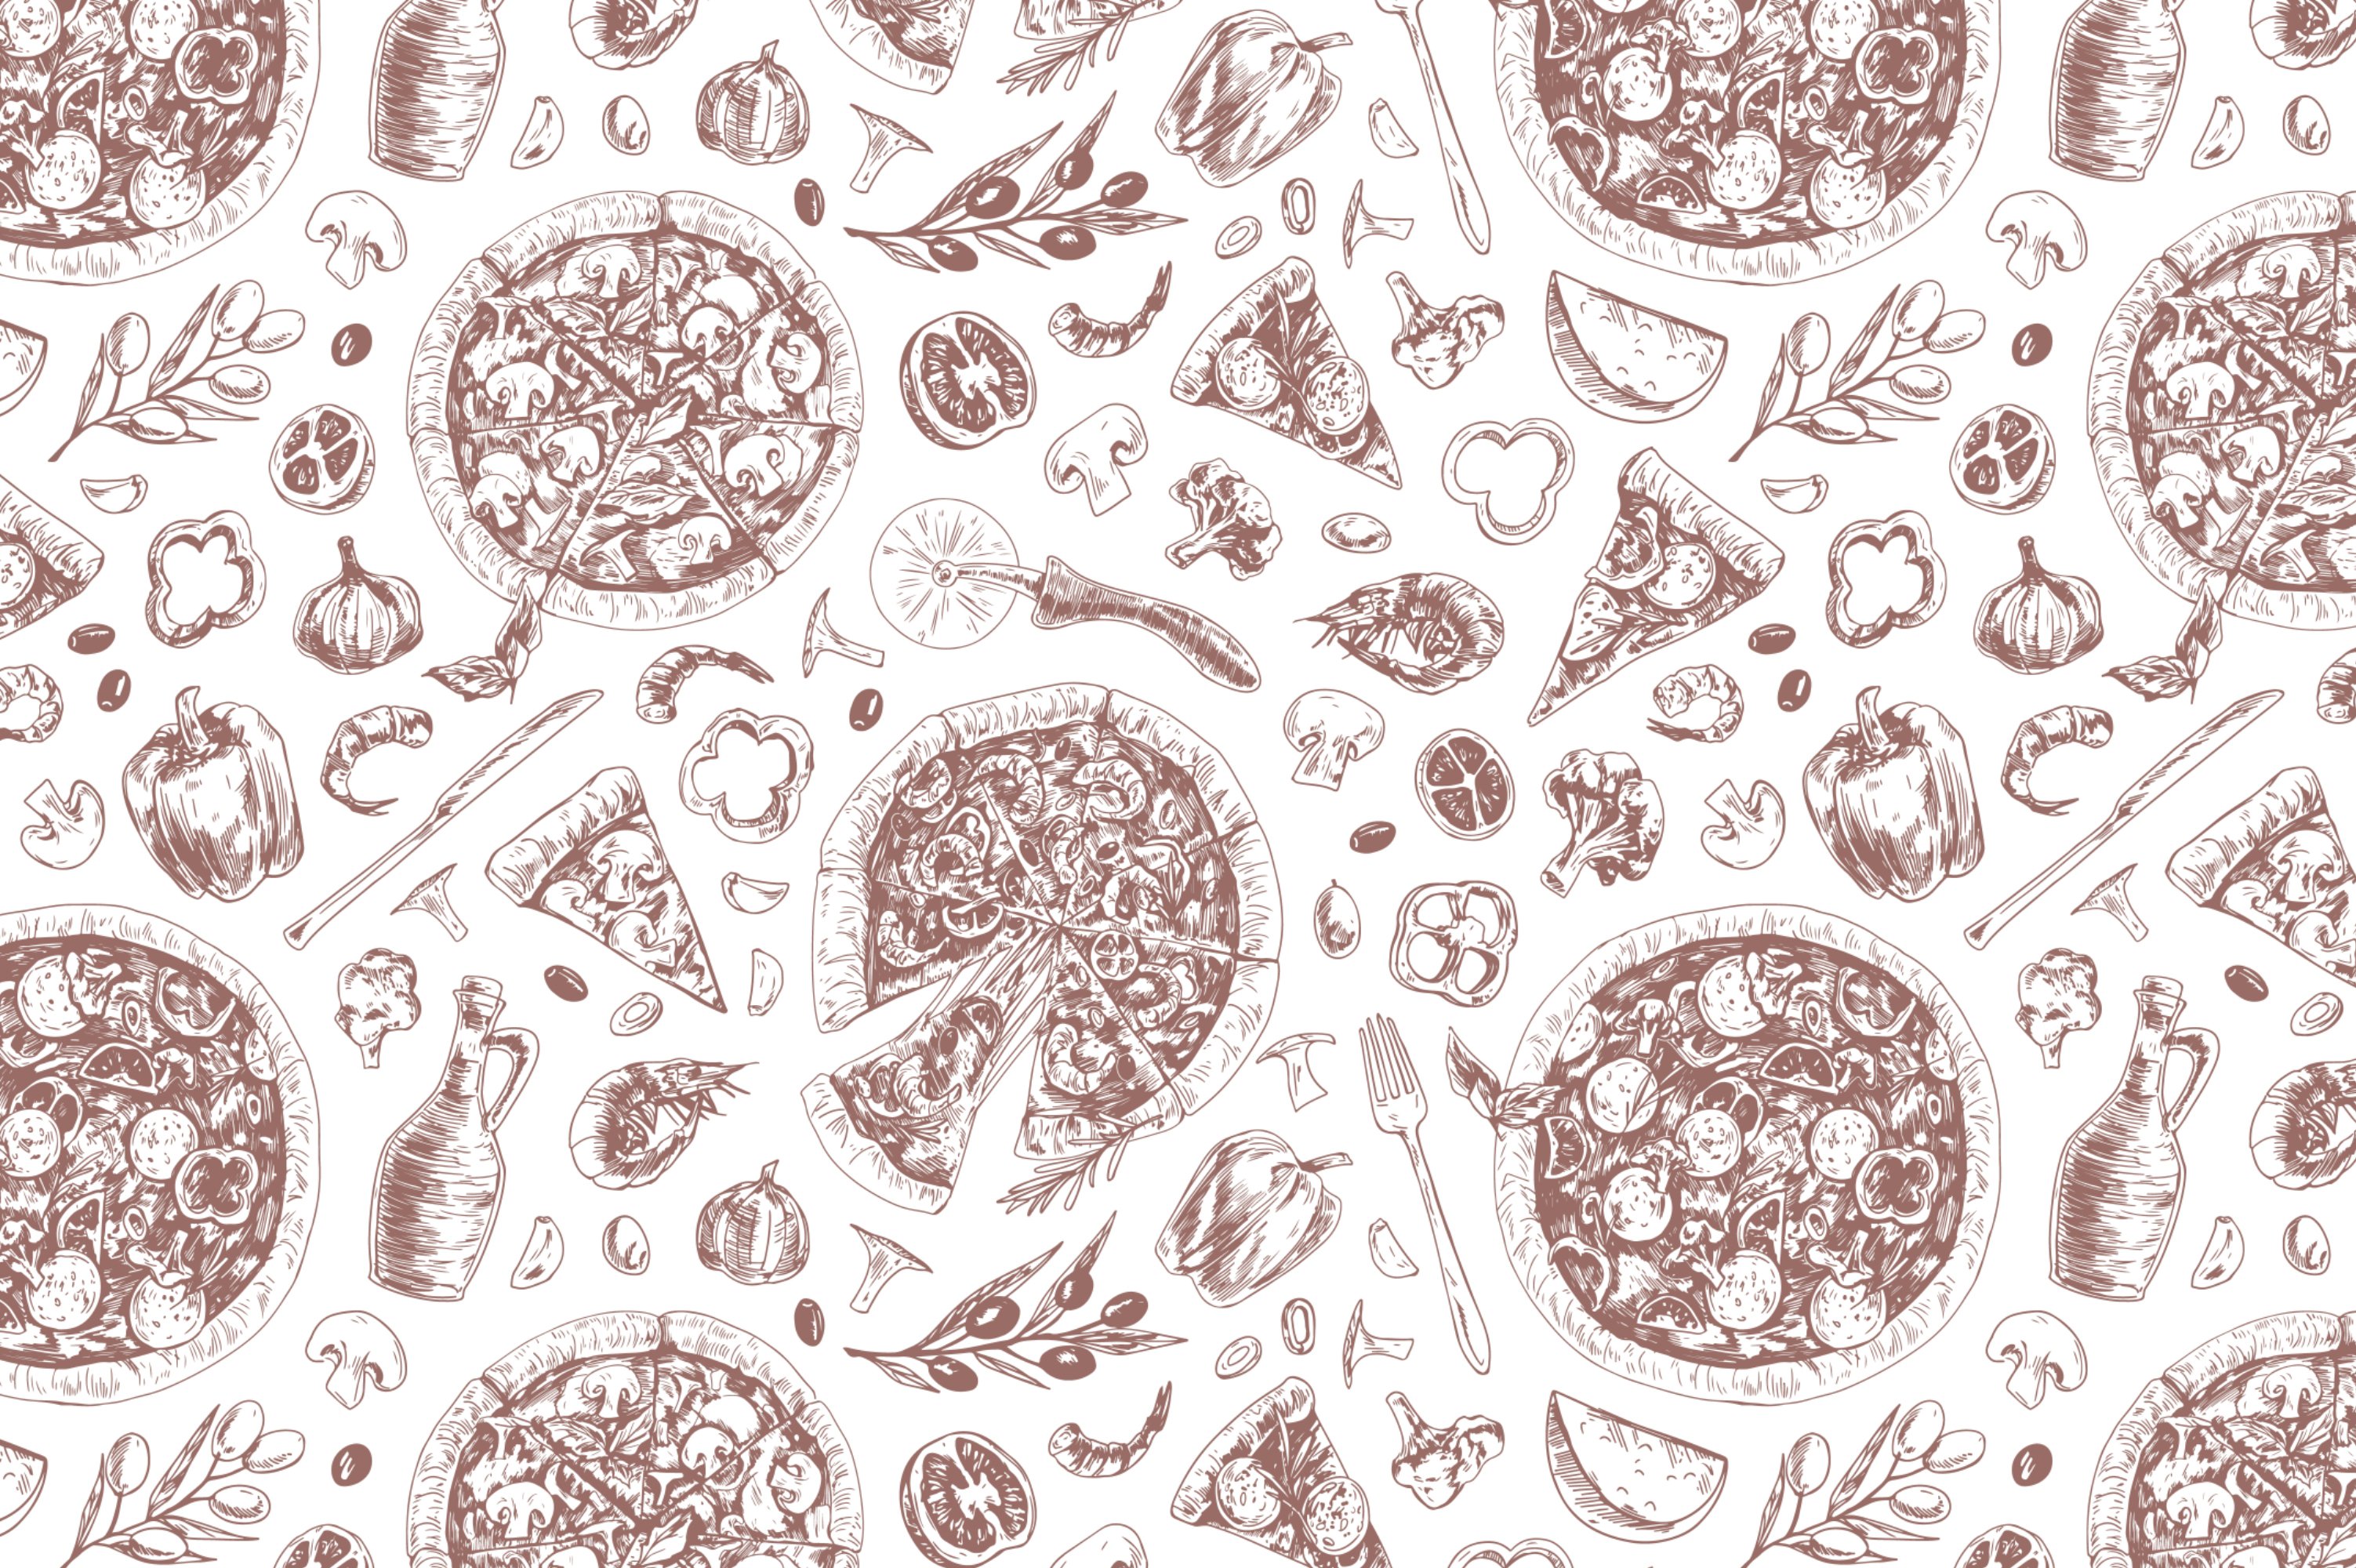 pizza and pizza ingridients patterns 3 133